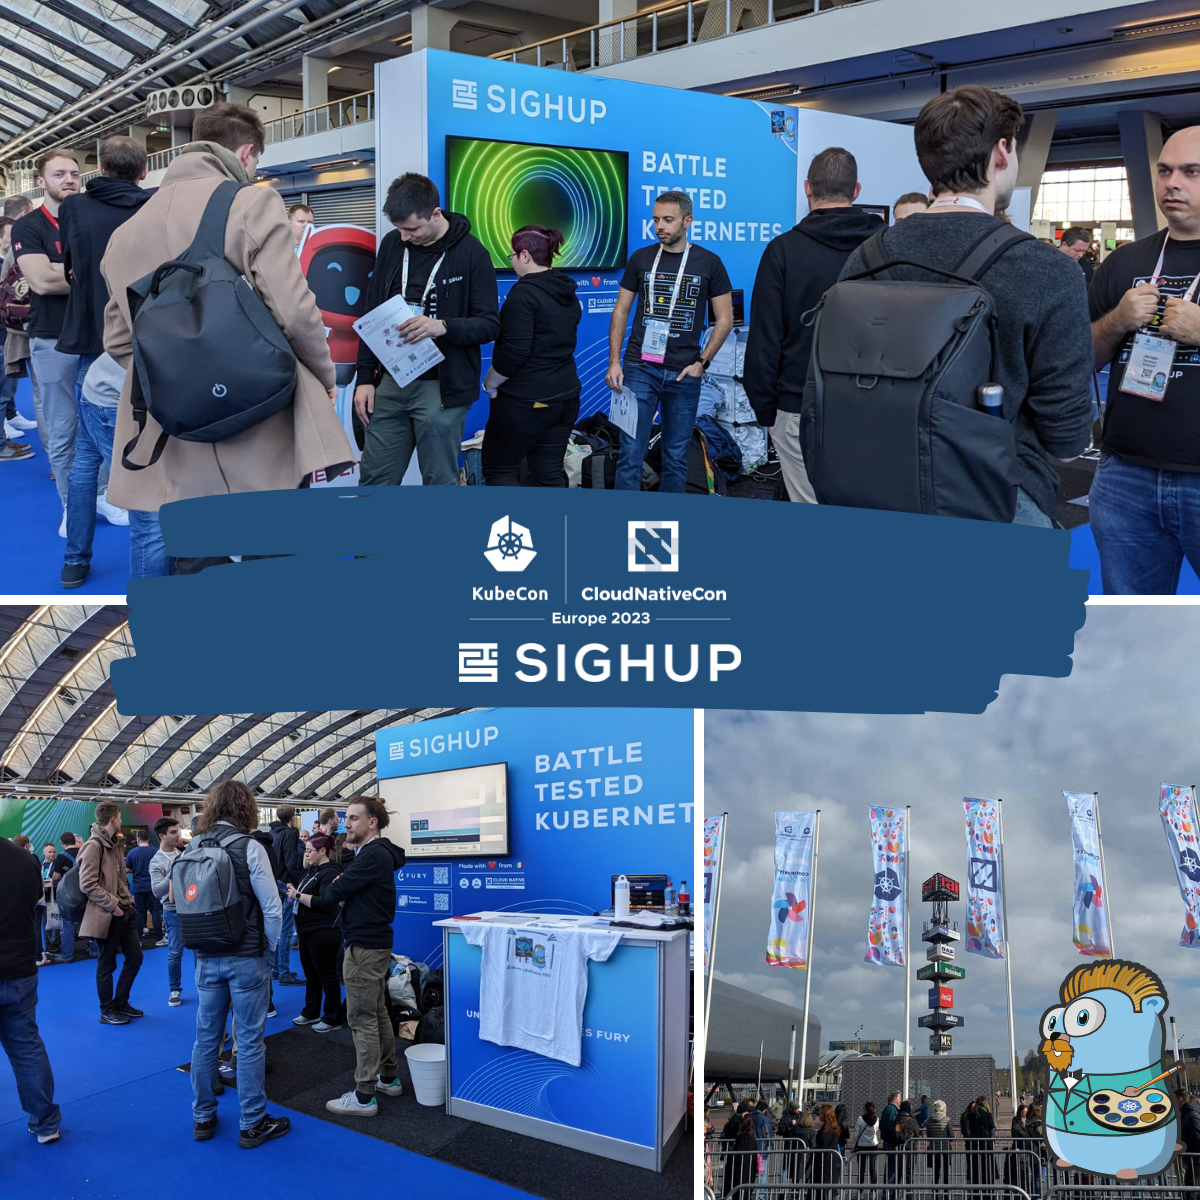 SIGHUP’s tales from KubeCon + CloudNativeCon EU 2023